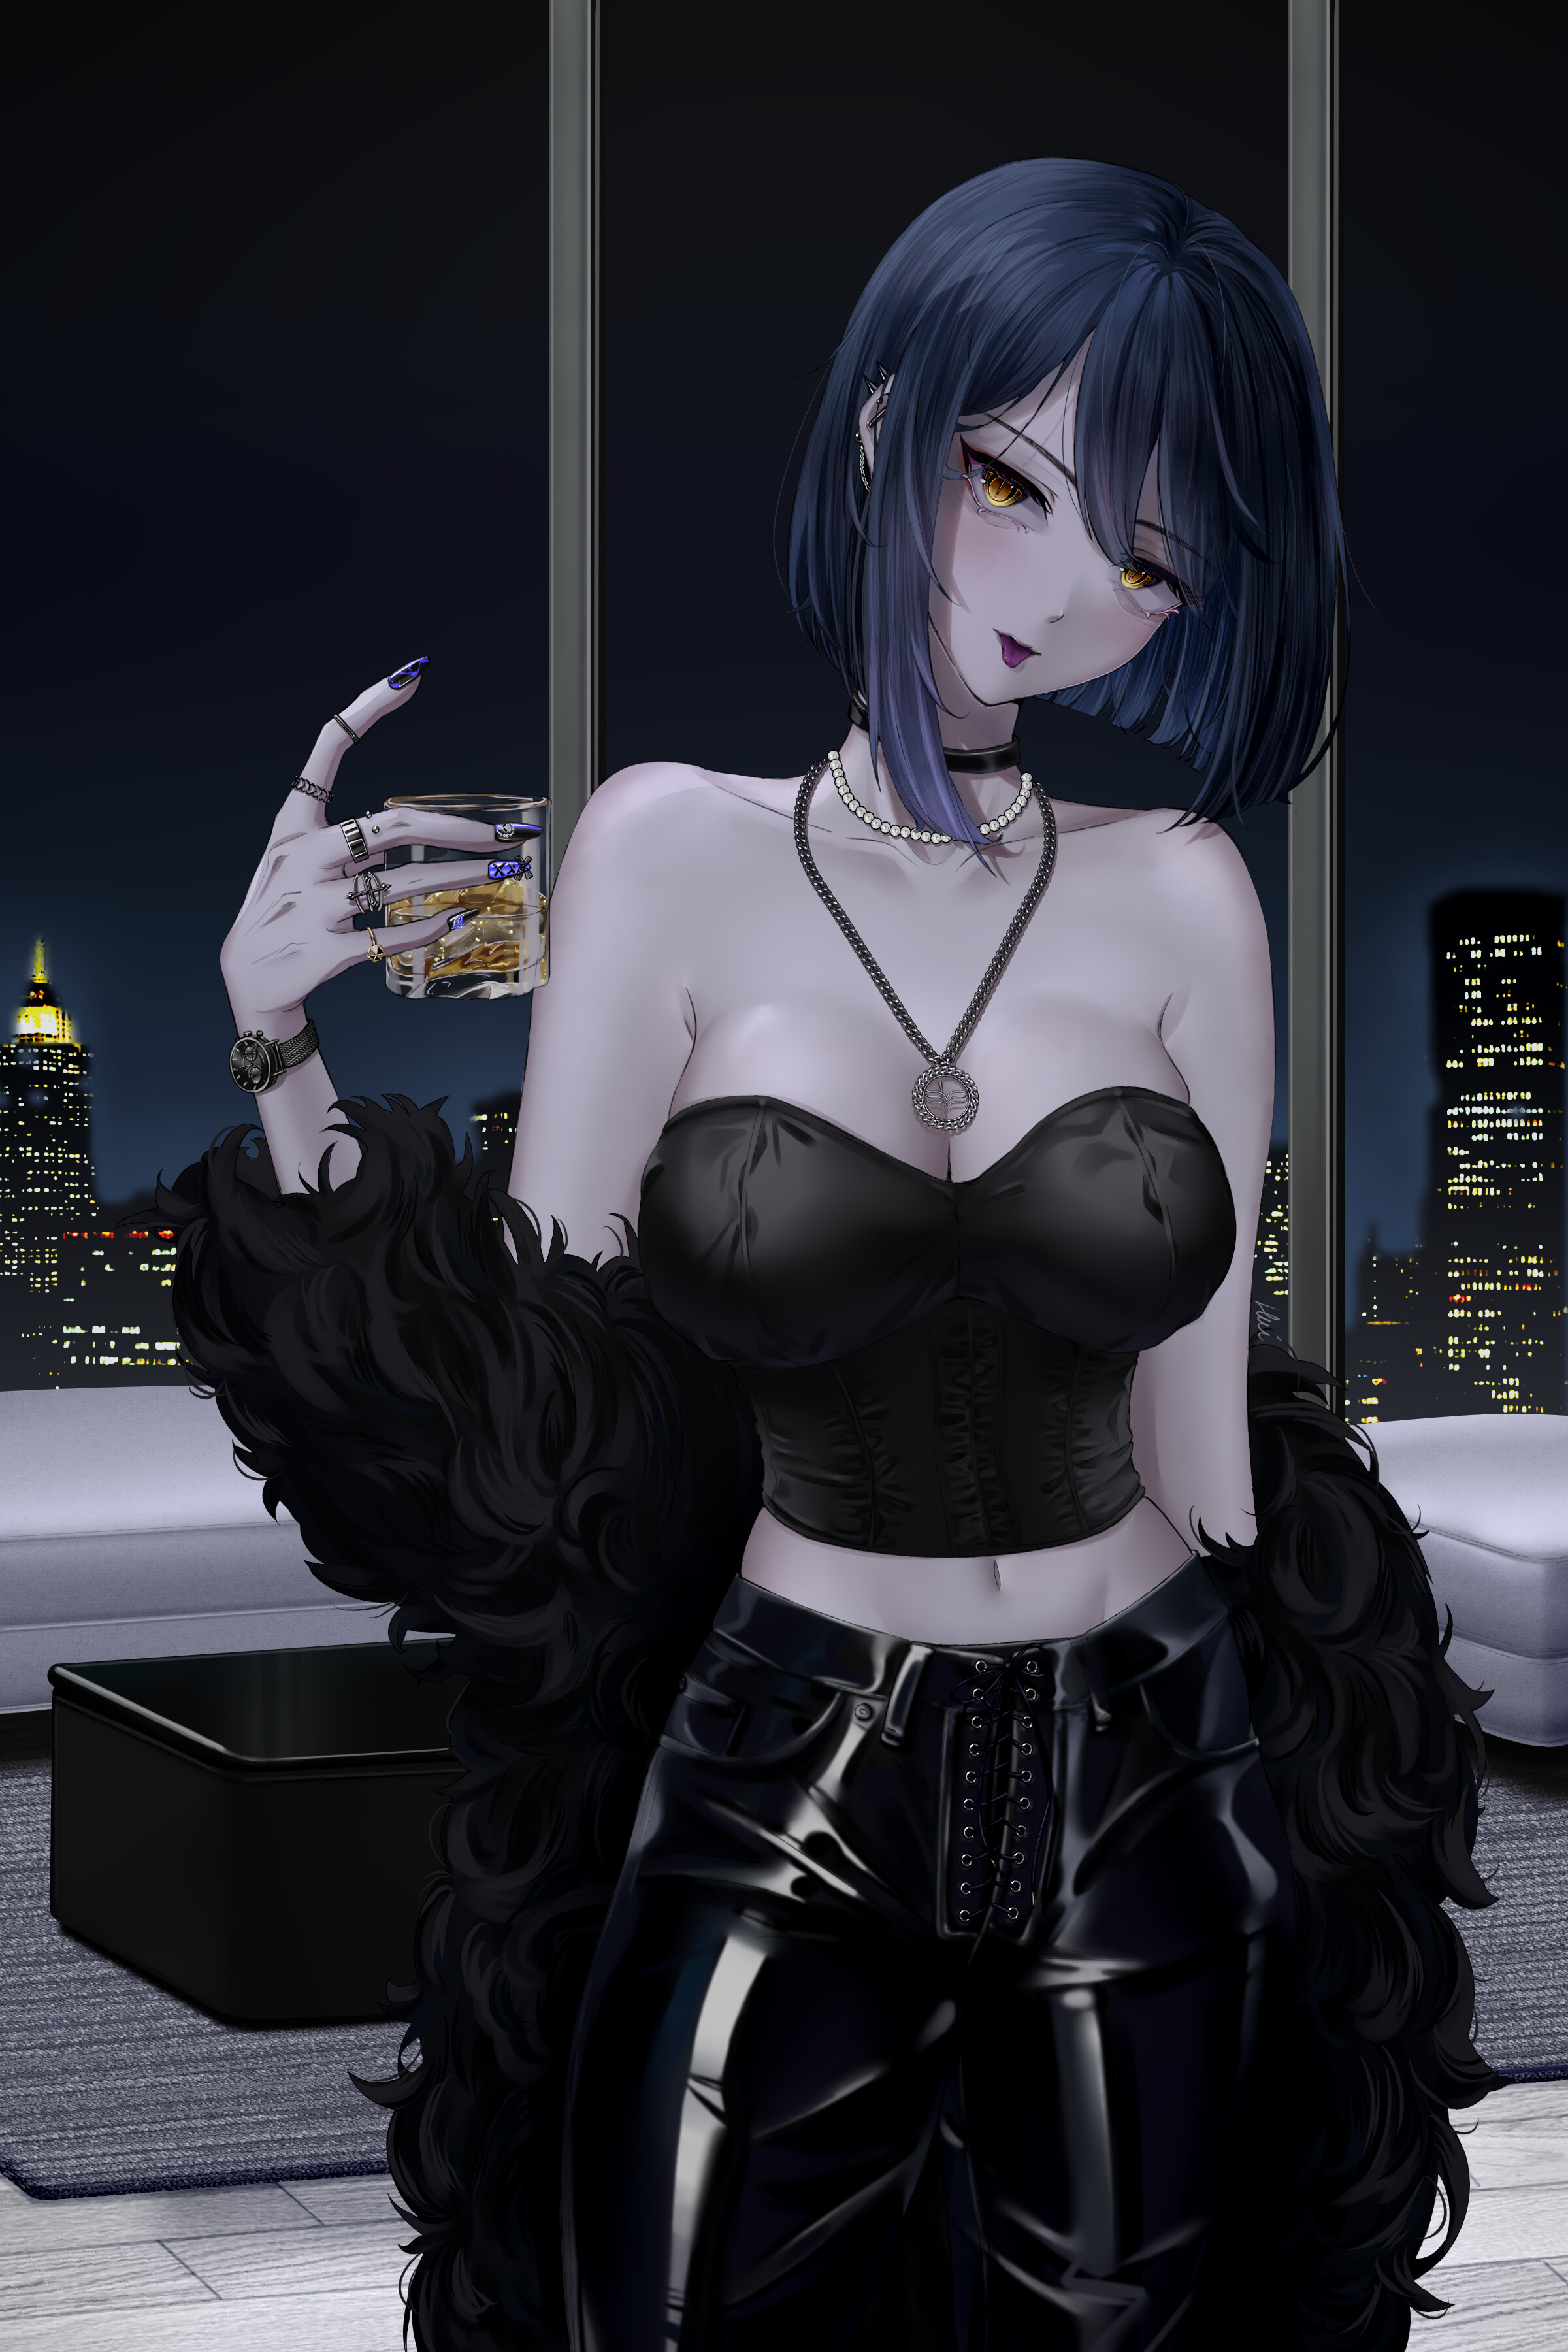 Strapless Bras Anime Girls Vertical Necklace Pearls Drink Alcohol Tongue Out City Lights City 2400x3600